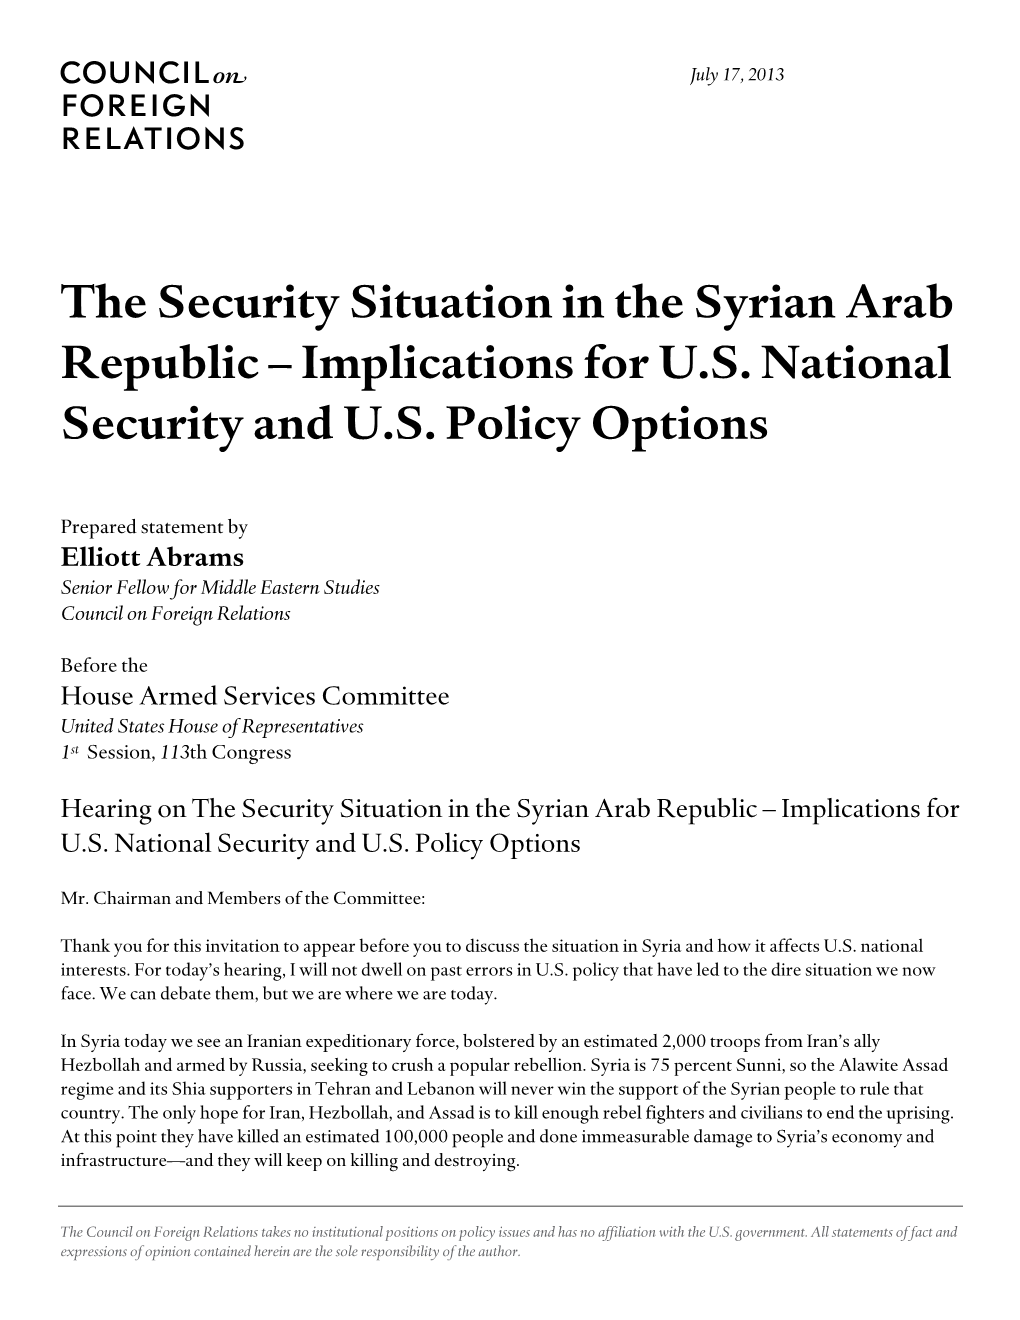 The Security Situation in the Syrian Arab Republic – Implications for U.S